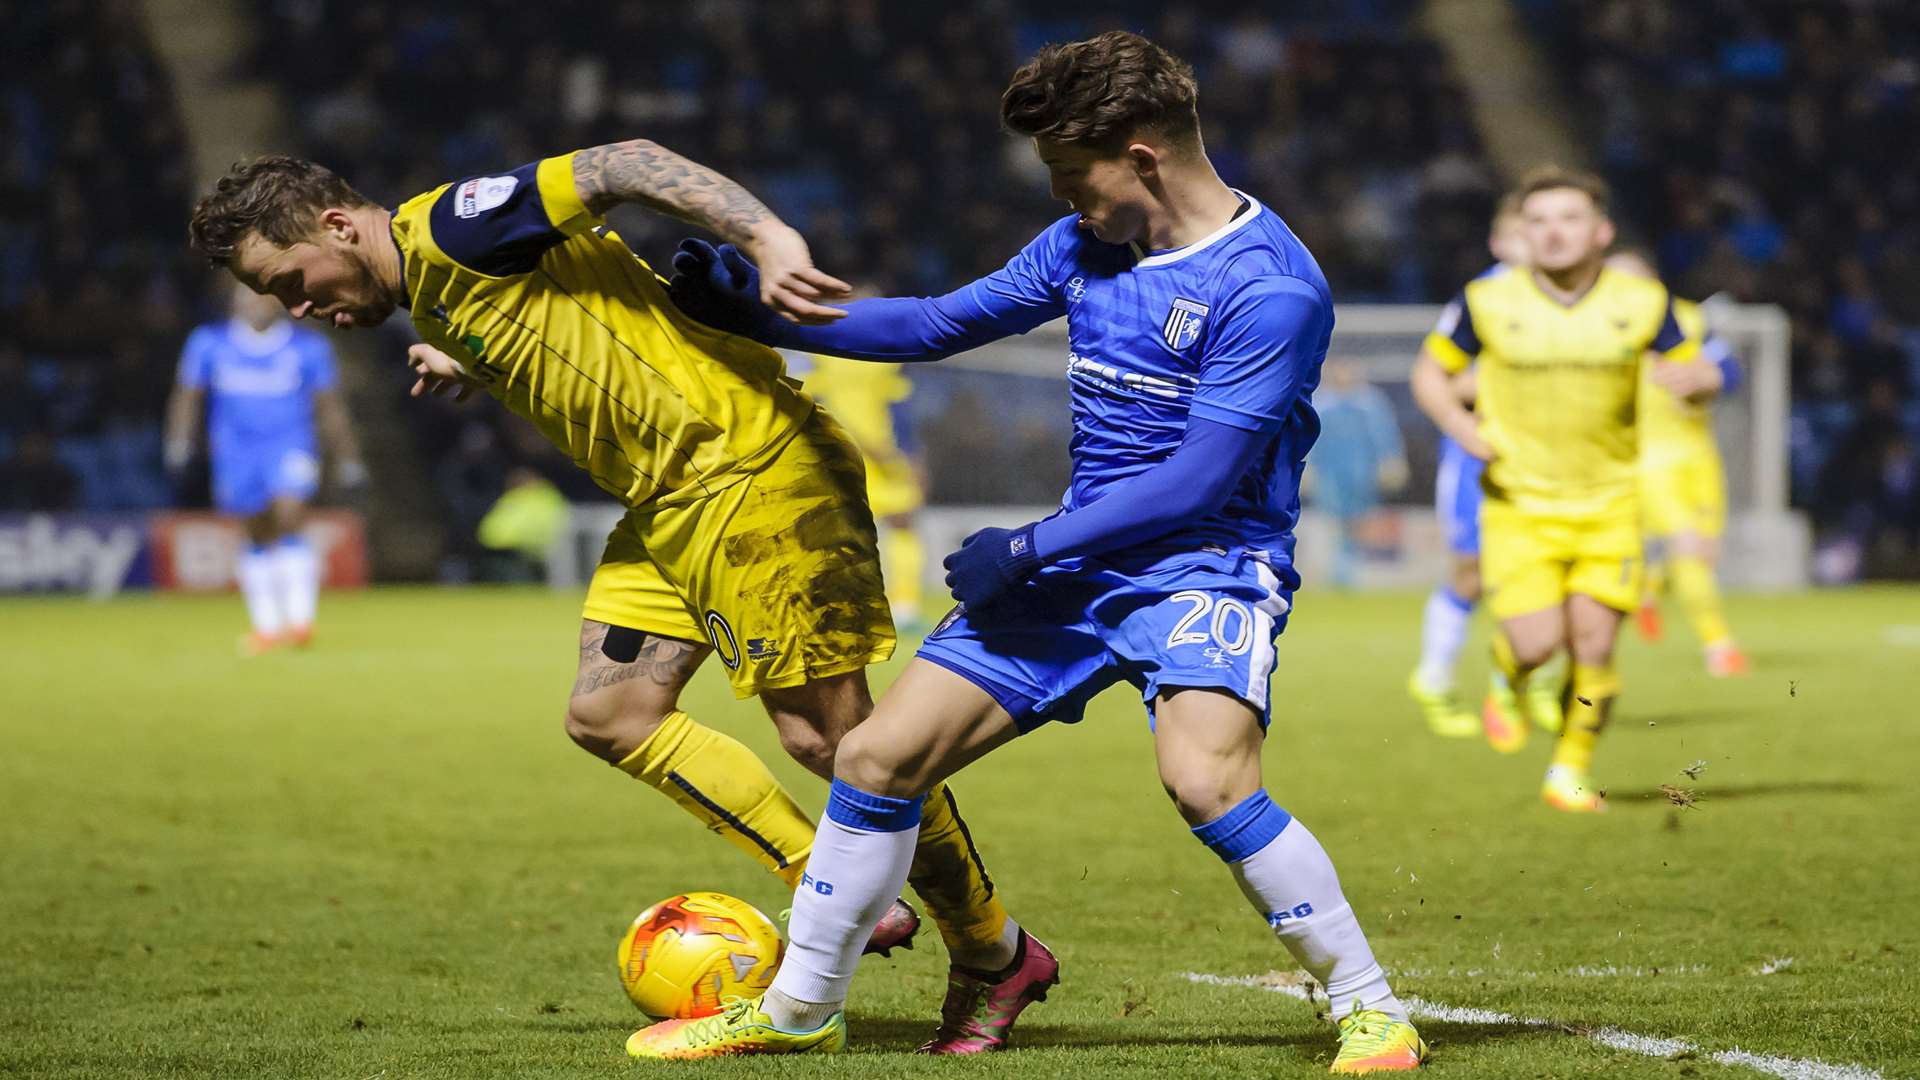 Darren Oldaker puts pressure on Chris Maguire Picture: Andy Payton